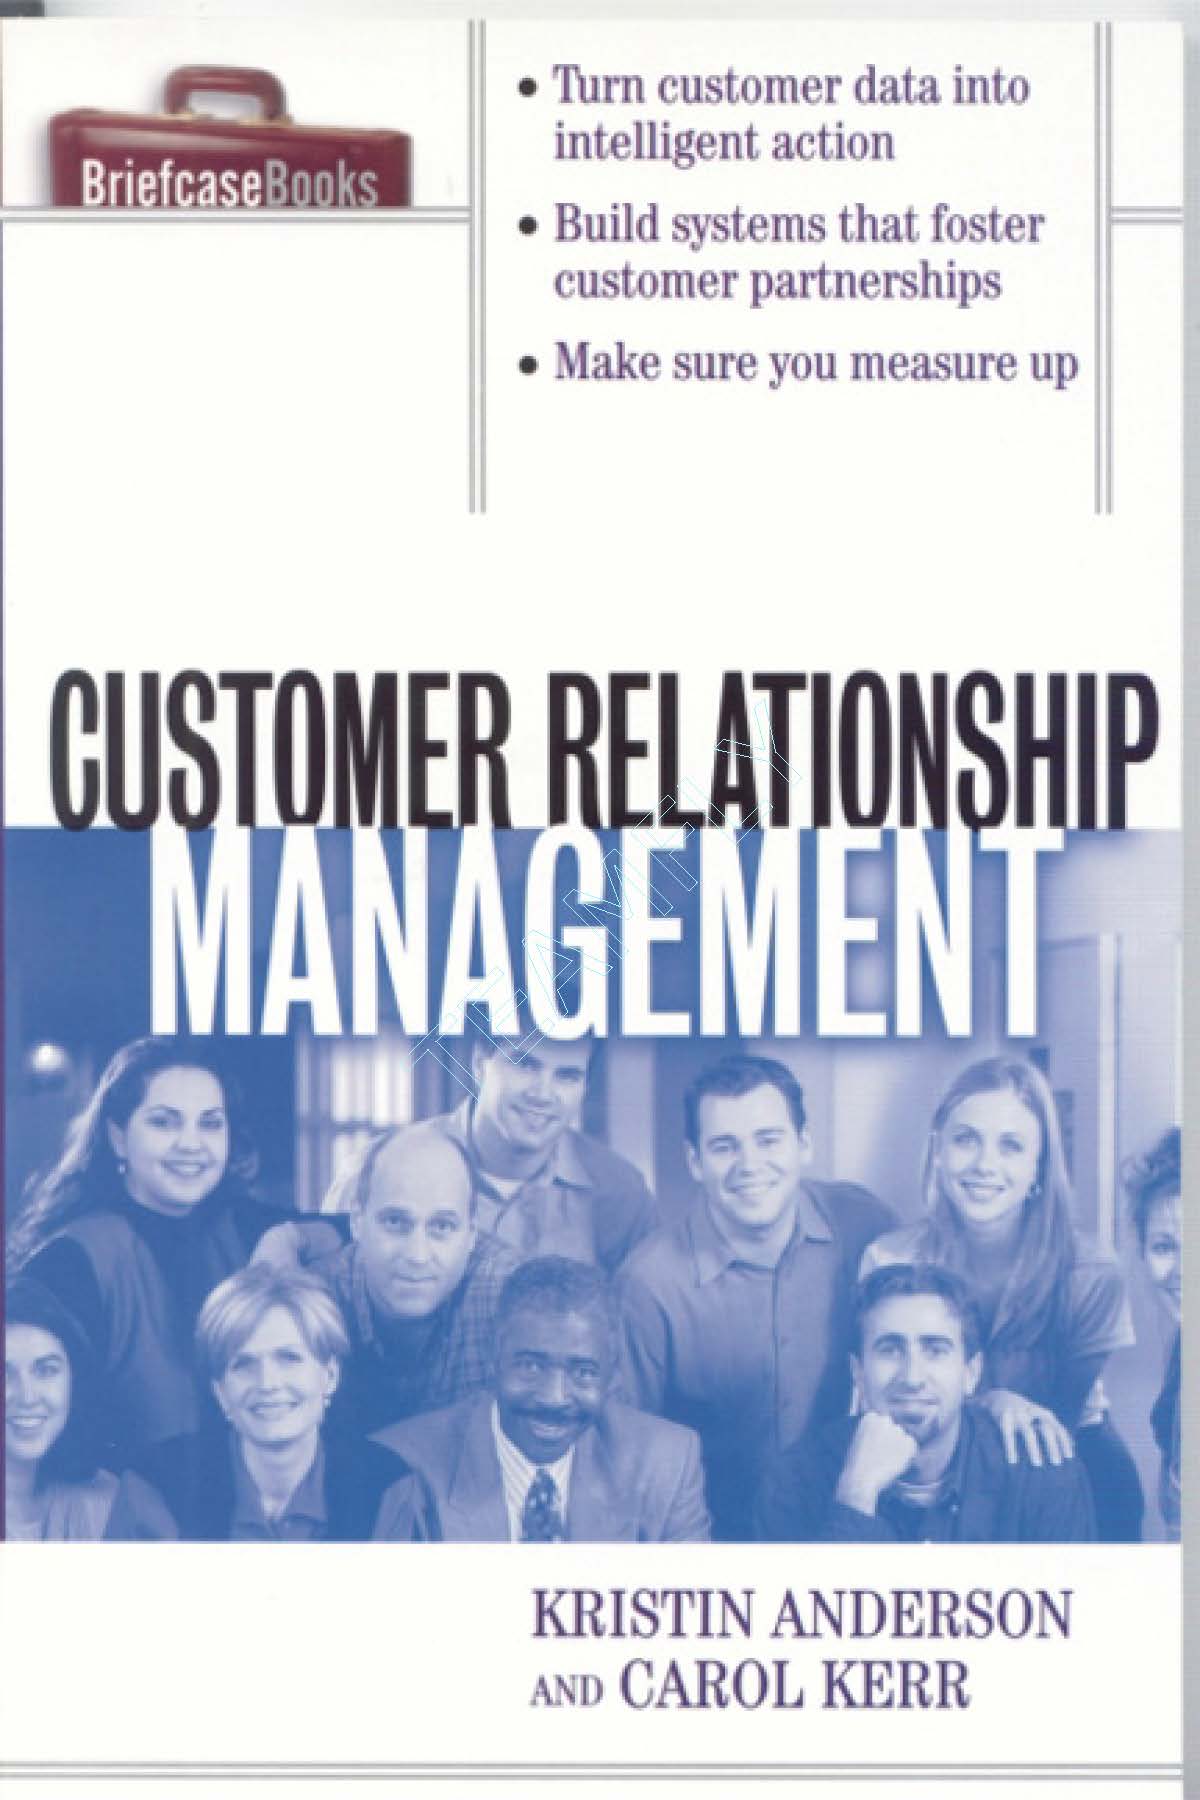 phd thesis on customer relationship management pdf